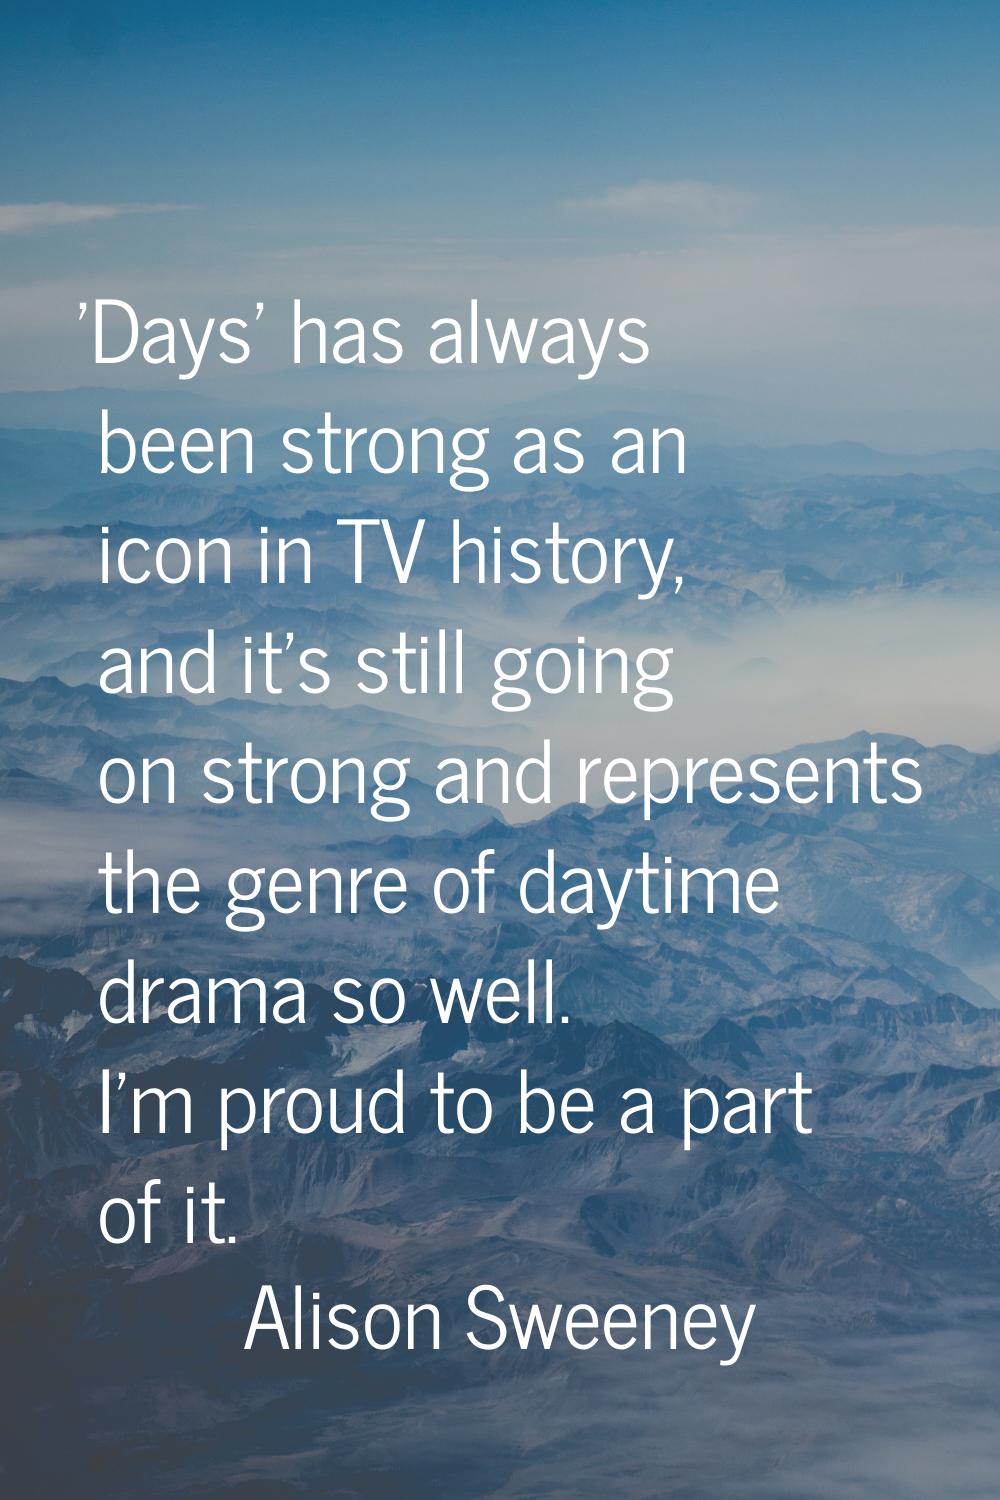 'Days' has always been strong as an icon in TV history, and it's still going on strong and represen